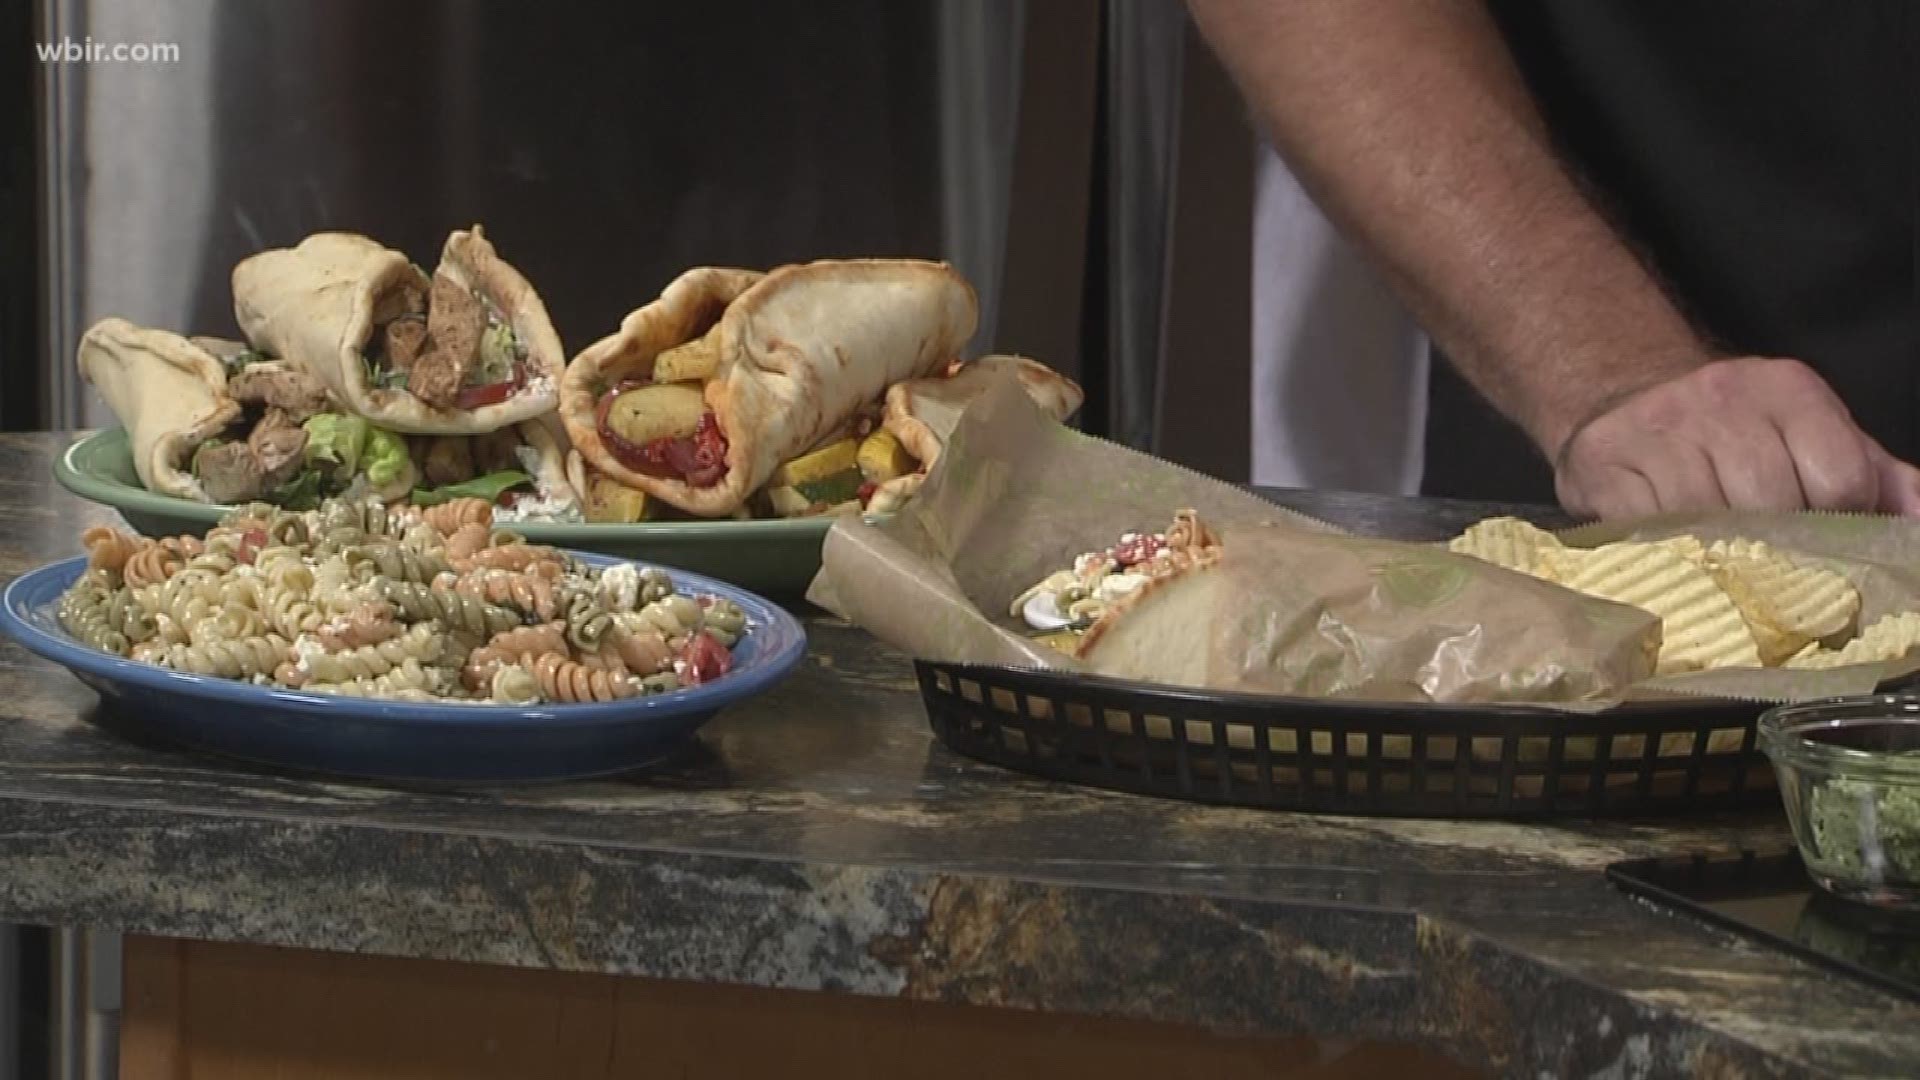 Trevor with Taziki's Mediterranean Cafe shares a recipe for a Gyro using fresh summer vegetables.
They're located at 6100 Kingston Pike in Knoxville, tazikiscafe.com
Aug. 13, 2018-4pm